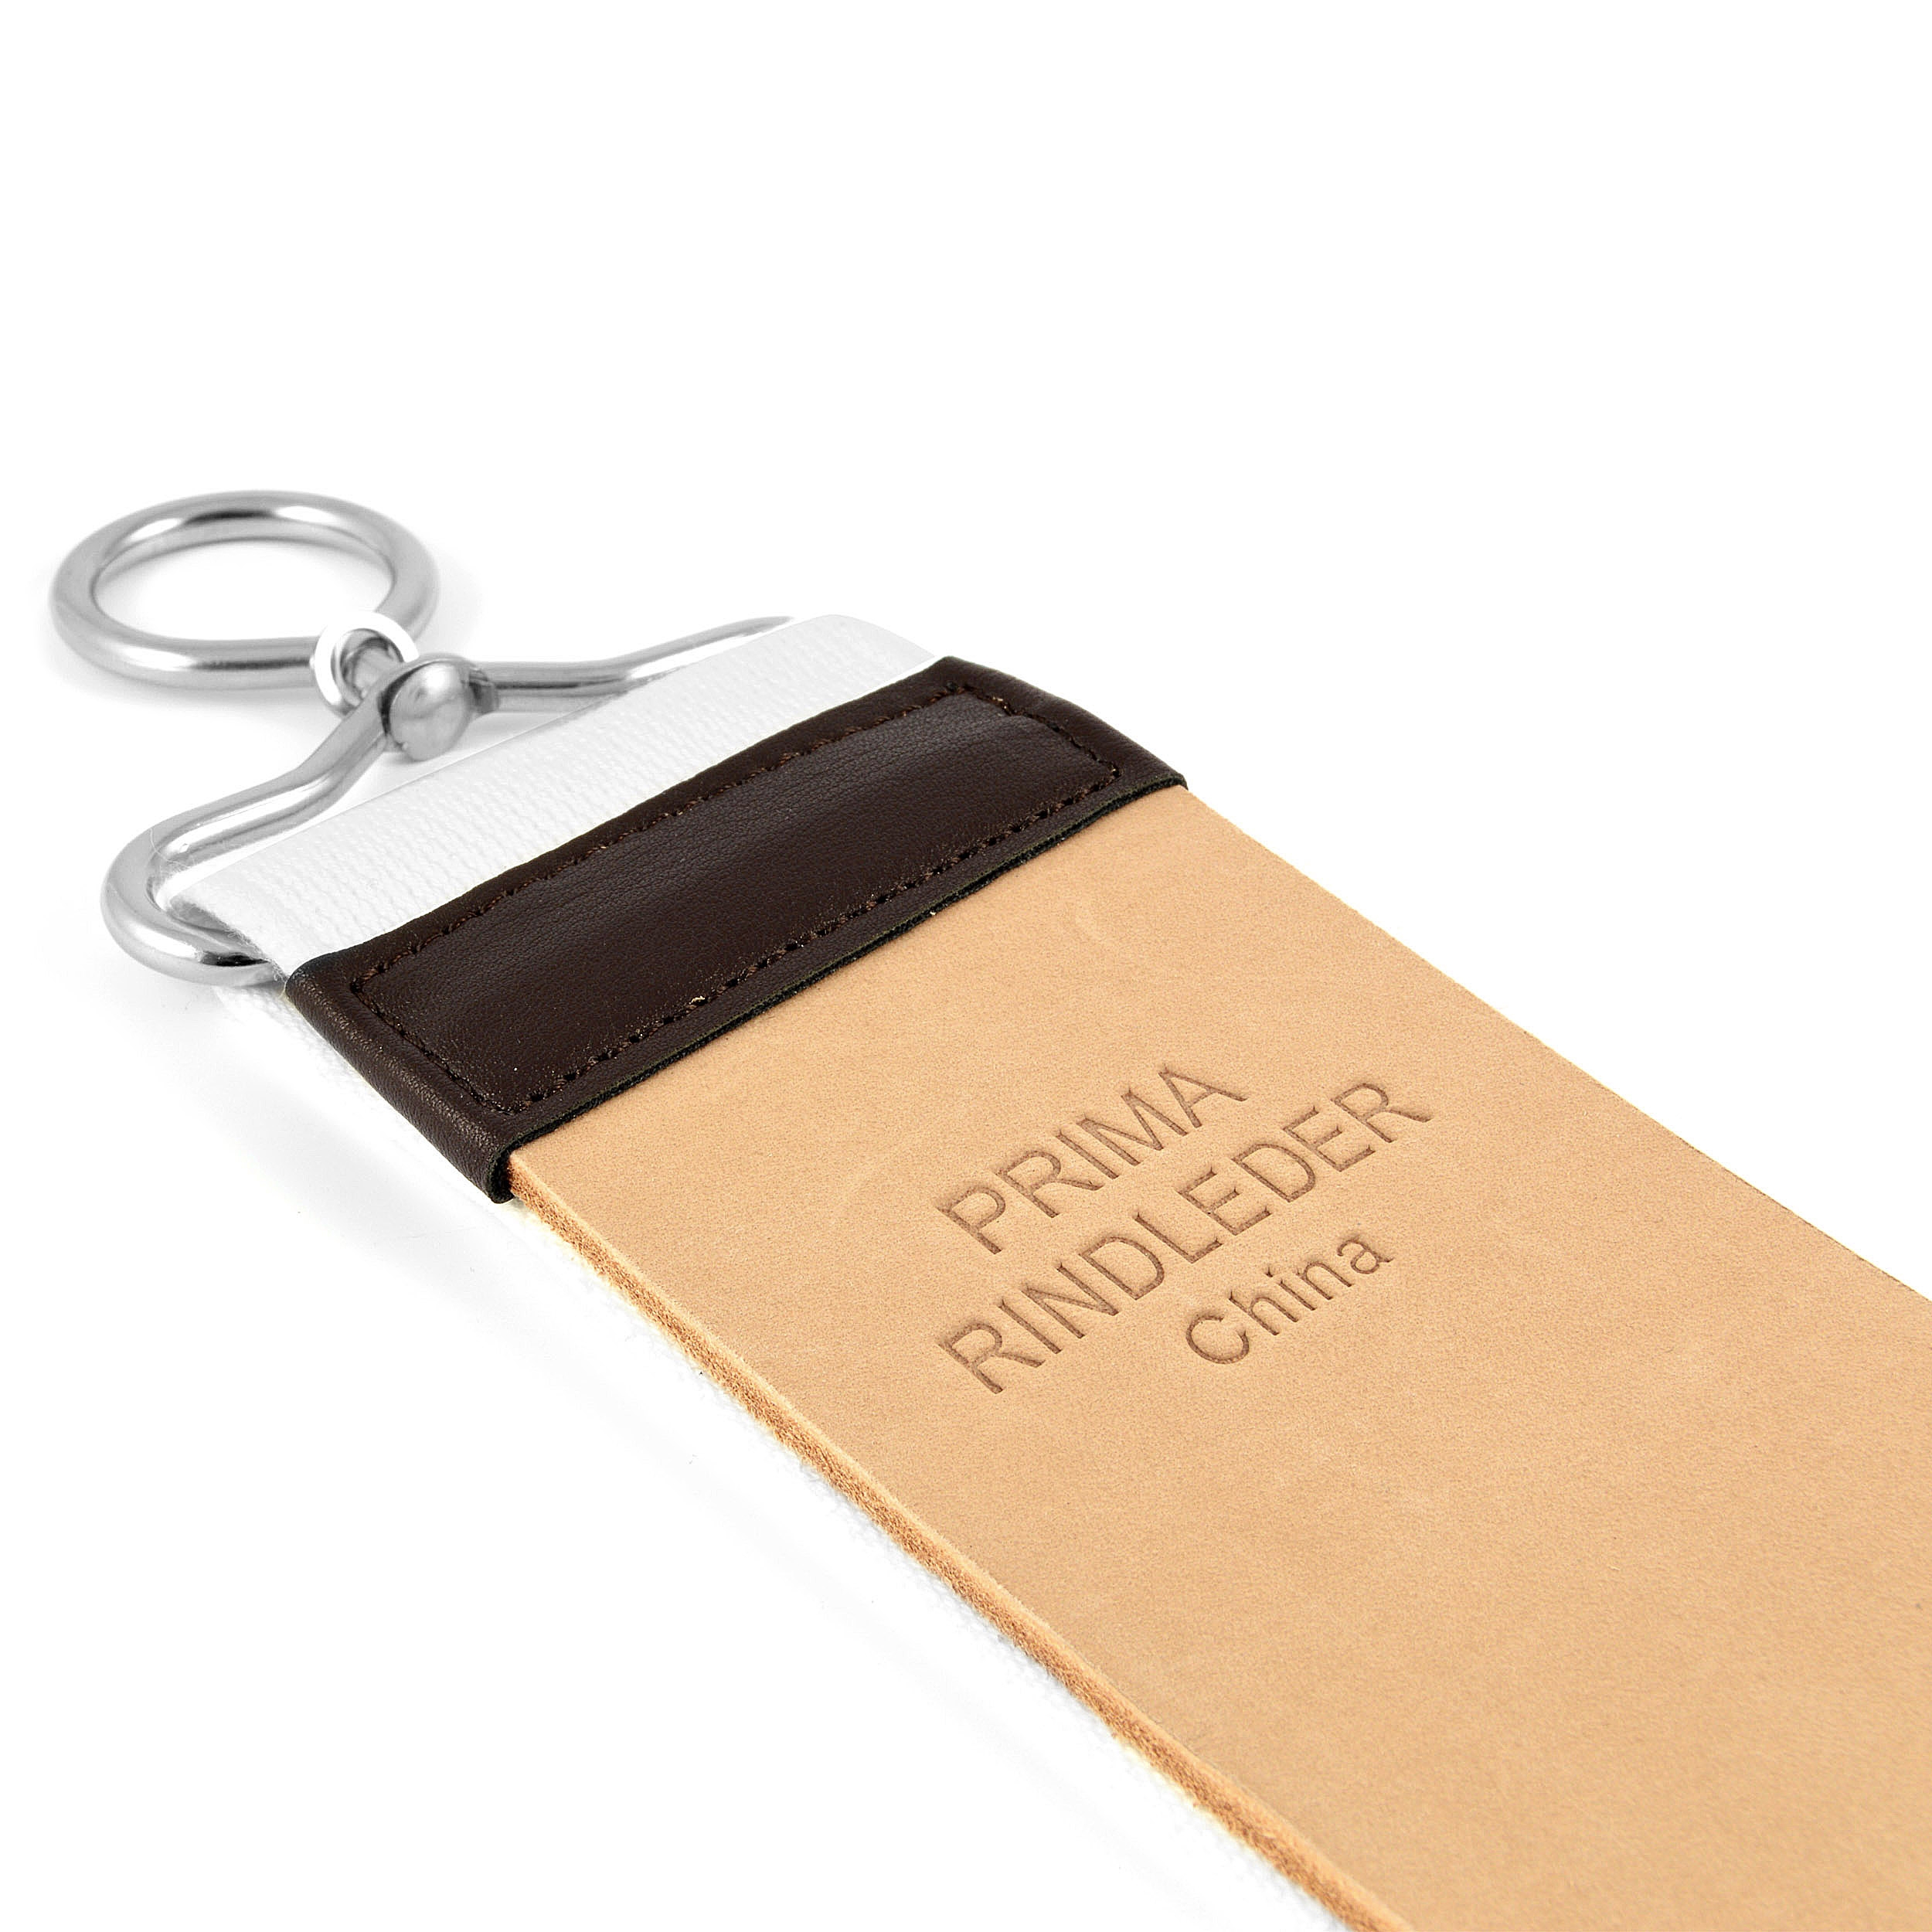 EXTRA WIDE ONE SIDED HANGING STROP – Frank Shaving